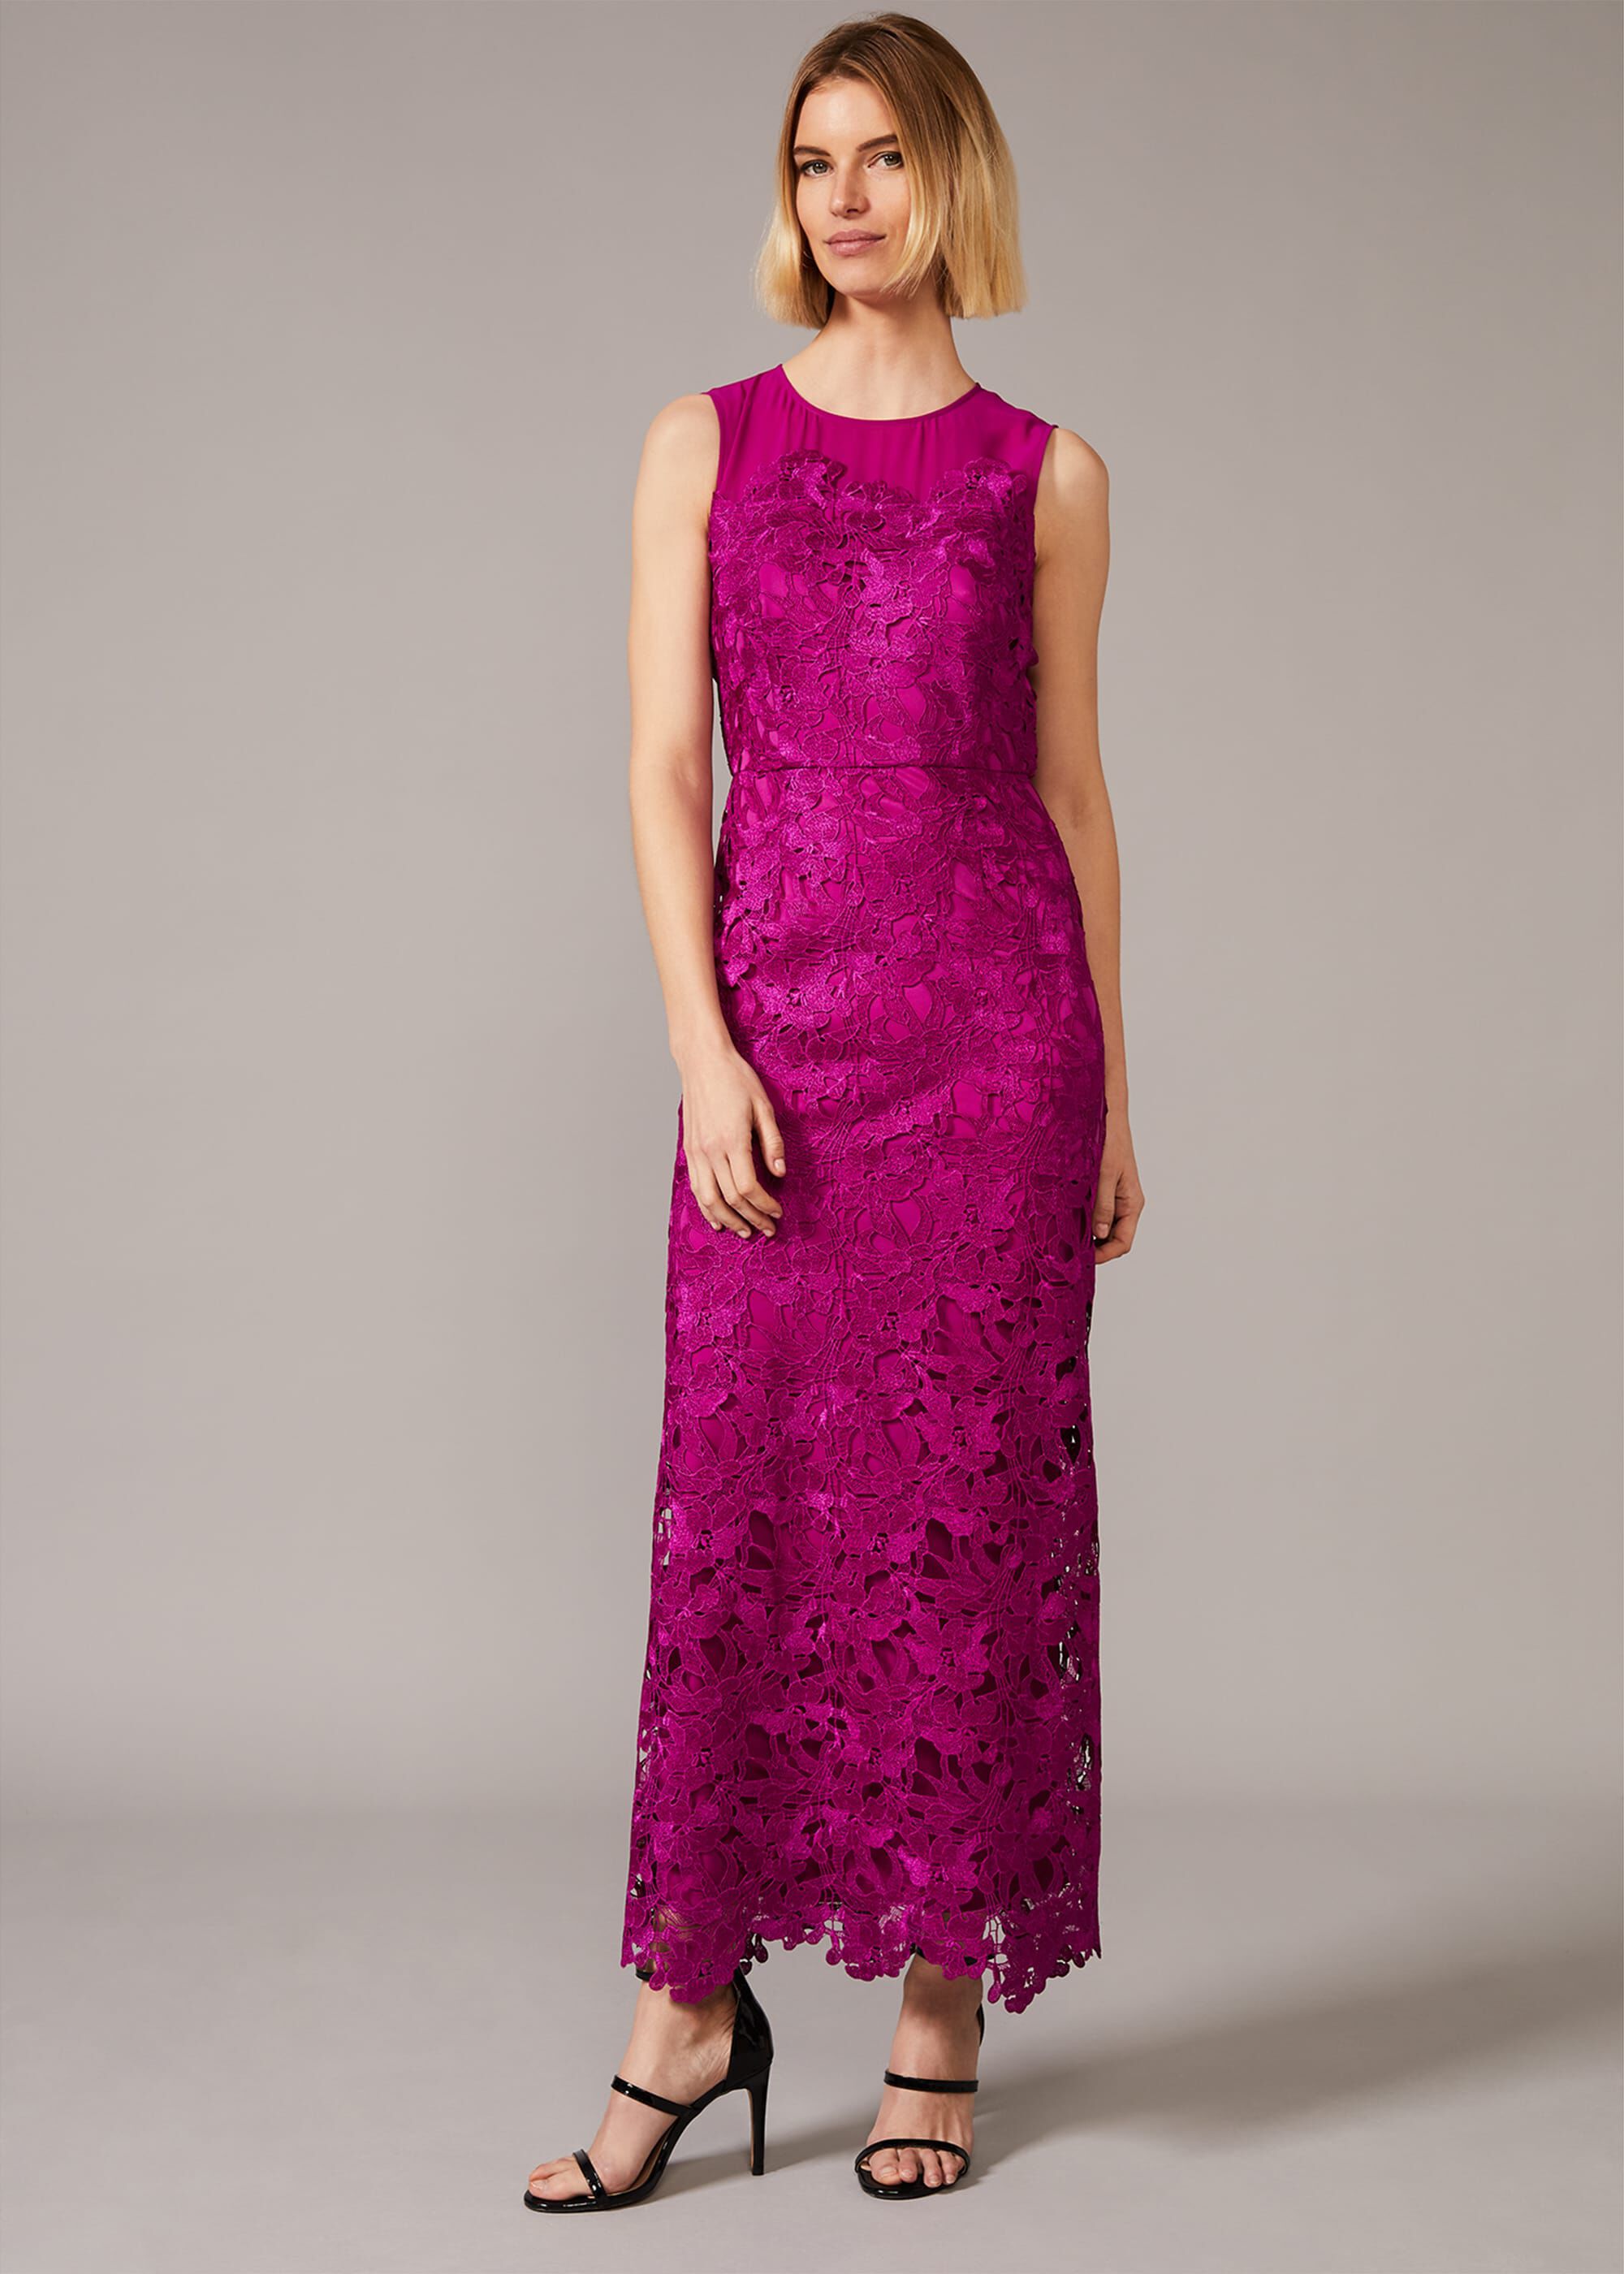 Bessie Lace Maxi Dress | Phase Eight